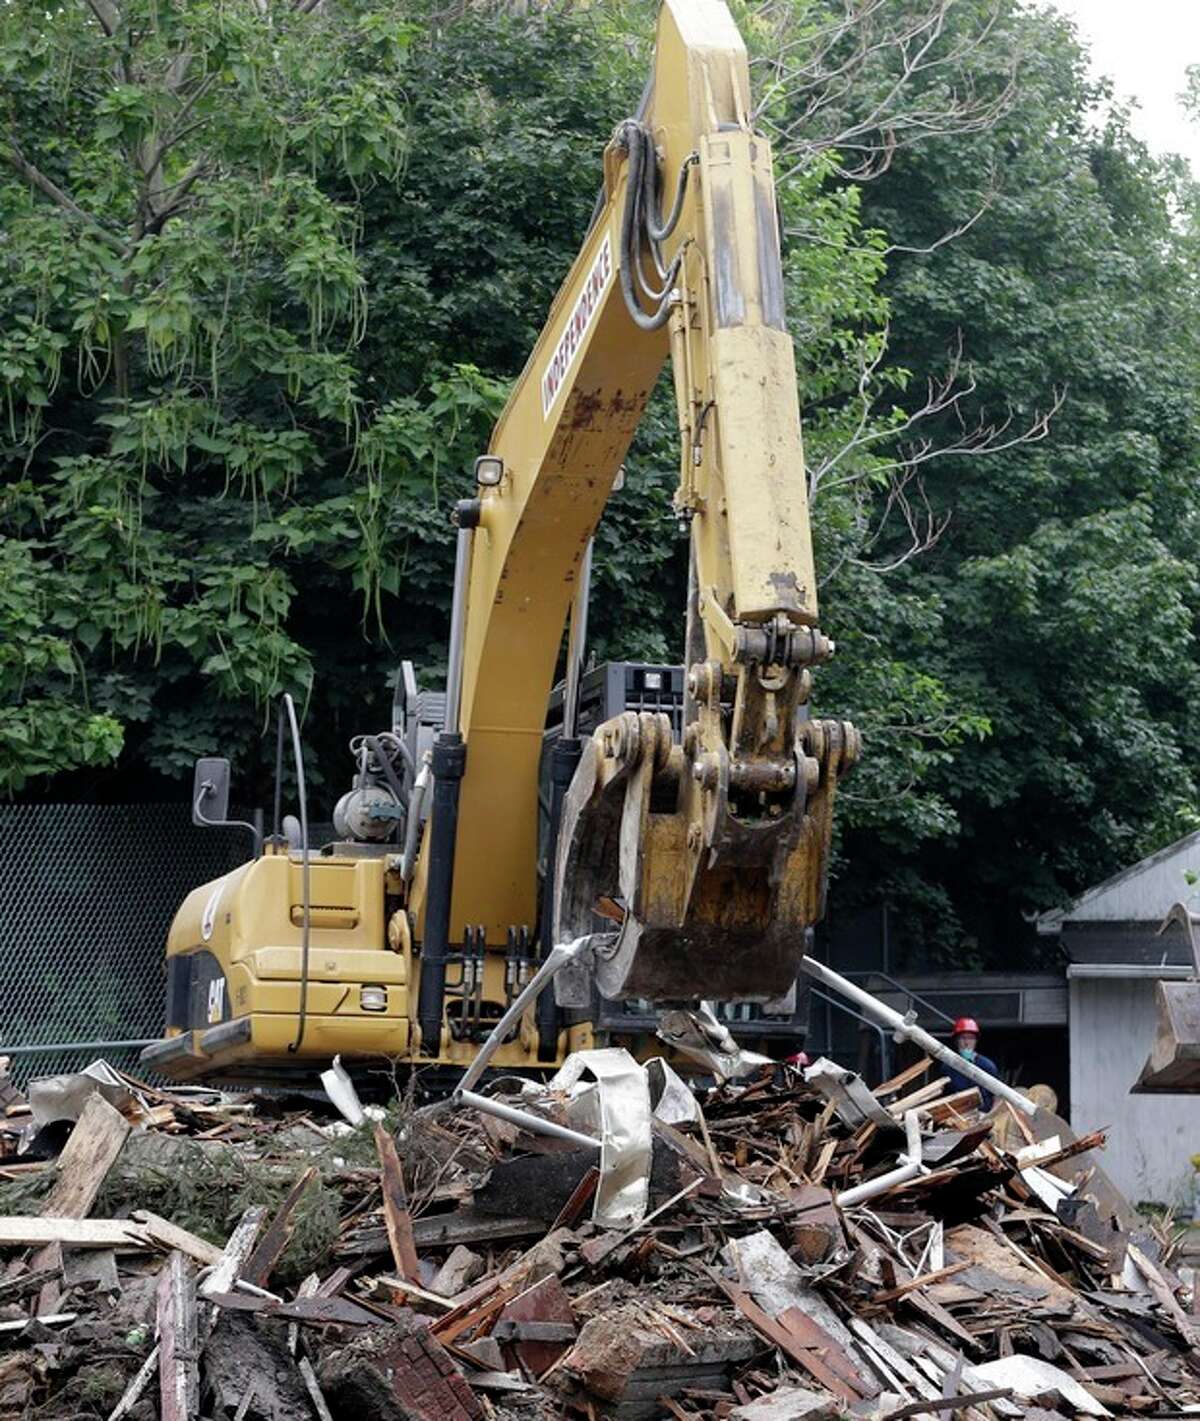 The house where three women were held captive and raped for more than a decade is demolished, Wednesday, Aug. 7, 2013, in Cleveland. Authorities want to make sure the rubble isn't sold online as "murderabilia," though no one died there. The house was torn down as part of a deal that spared Ariel Castro a possible death sentence. He was sentenced last week to life in prison plus 1,000 years. Castro apologized but blamed his addiction to pornography. (AP Photo/Tony Dejak)